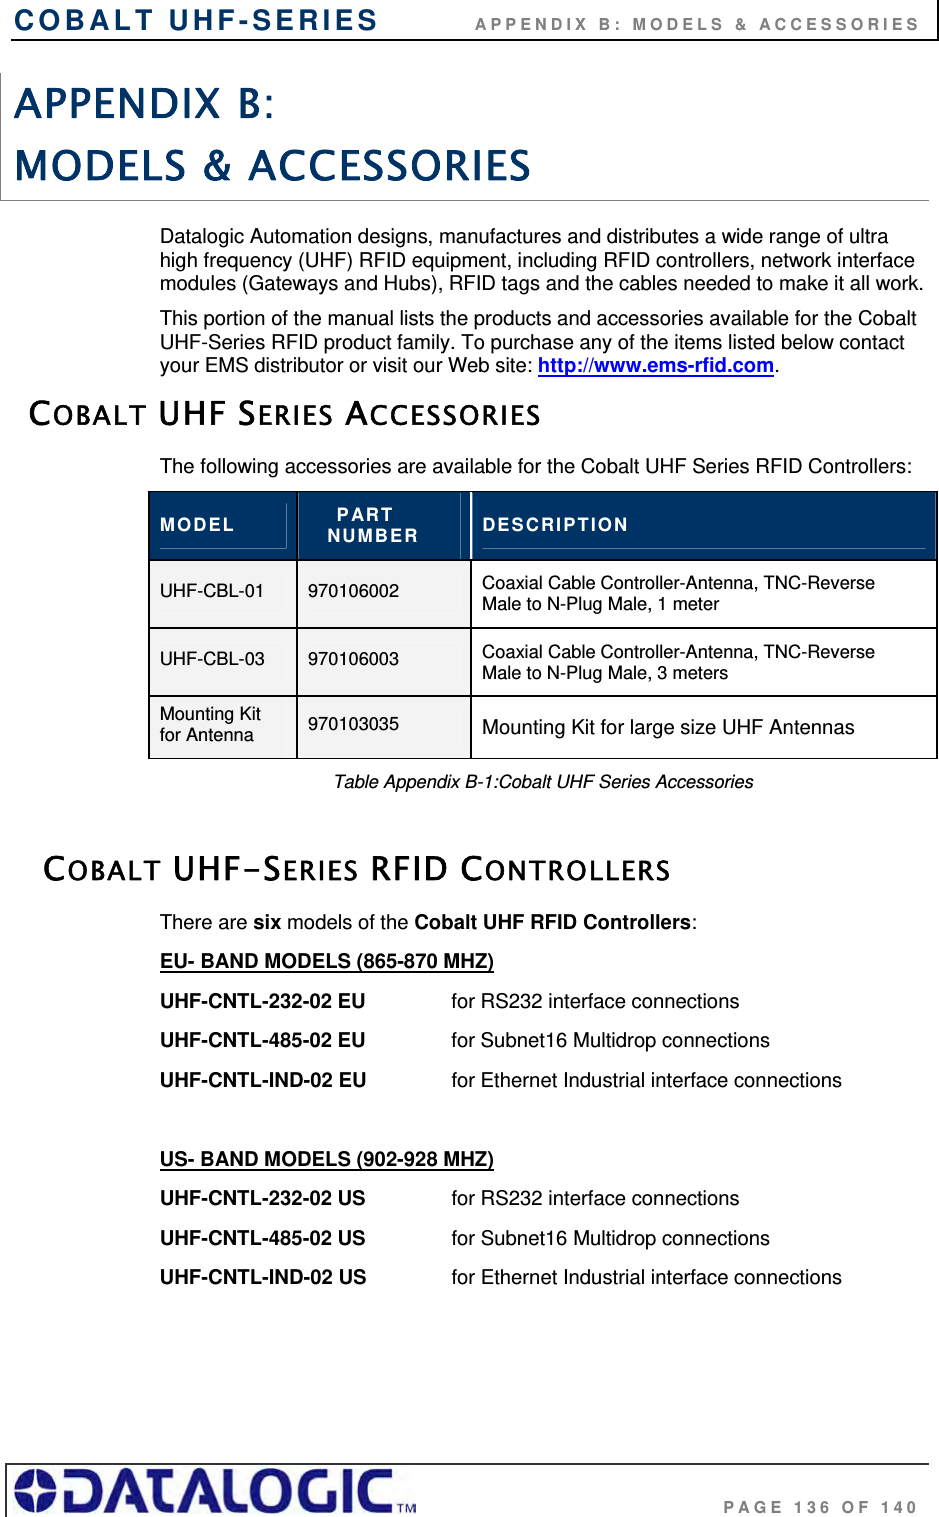 COBALT UHF-SERIES           APPENDIX B: MODELS &amp; ACCESSORIES                                     PAGE 136 OF 140 APPENDIX B:  MODELS &amp; ACCESSORIES Datalogic Automation designs, manufactures and distributes a wide range of ultra high frequency (UHF) RFID equipment, including RFID controllers, network interface modules (Gateways and Hubs), RFID tags and the cables needed to make it all work.  This portion of the manual lists the products and accessories available for the Cobalt UHF-Series RFID product family. To purchase any of the items listed below contact your EMS distributor or visit our Web site: http://www.ems-rfid.com.  COBALT UHF SERIES ACCESSORIES The following accessories are available for the Cobalt UHF Series RFID Controllers: MODEL      PART NUMBER  DESCRIPTION UHF-CBL-01  970106002  Coaxial Cable Controller-Antenna, TNC-Reverse Male to N-Plug Male, 1 meter UHF-CBL-03  970106003  Coaxial Cable Controller-Antenna, TNC-Reverse Male to N-Plug Male, 3 meters Mounting Kit for Antenna  970103035  Mounting Kit for large size UHF Antennas Table Appendix B-1:Cobalt UHF Series Accessories  COBALT UHF-SERIES RFID CONTROLLERS  There are six models of the Cobalt UHF RFID Controllers: EU- BAND MODELS (865-870 MHZ) UHF-CNTL-232-02 EU    for RS232 interface connections  UHF-CNTL-485-02 EU    for Subnet16 Multidrop connections UHF-CNTL-IND-02 EU    for Ethernet Industrial interface connections  US- BAND MODELS (902-928 MHZ) UHF-CNTL-232-02 US    for RS232 interface connections UHF-CNTL-485-02 US    for Subnet16 Multidrop connections UHF-CNTL-IND-02 US    for Ethernet Industrial interface connections  